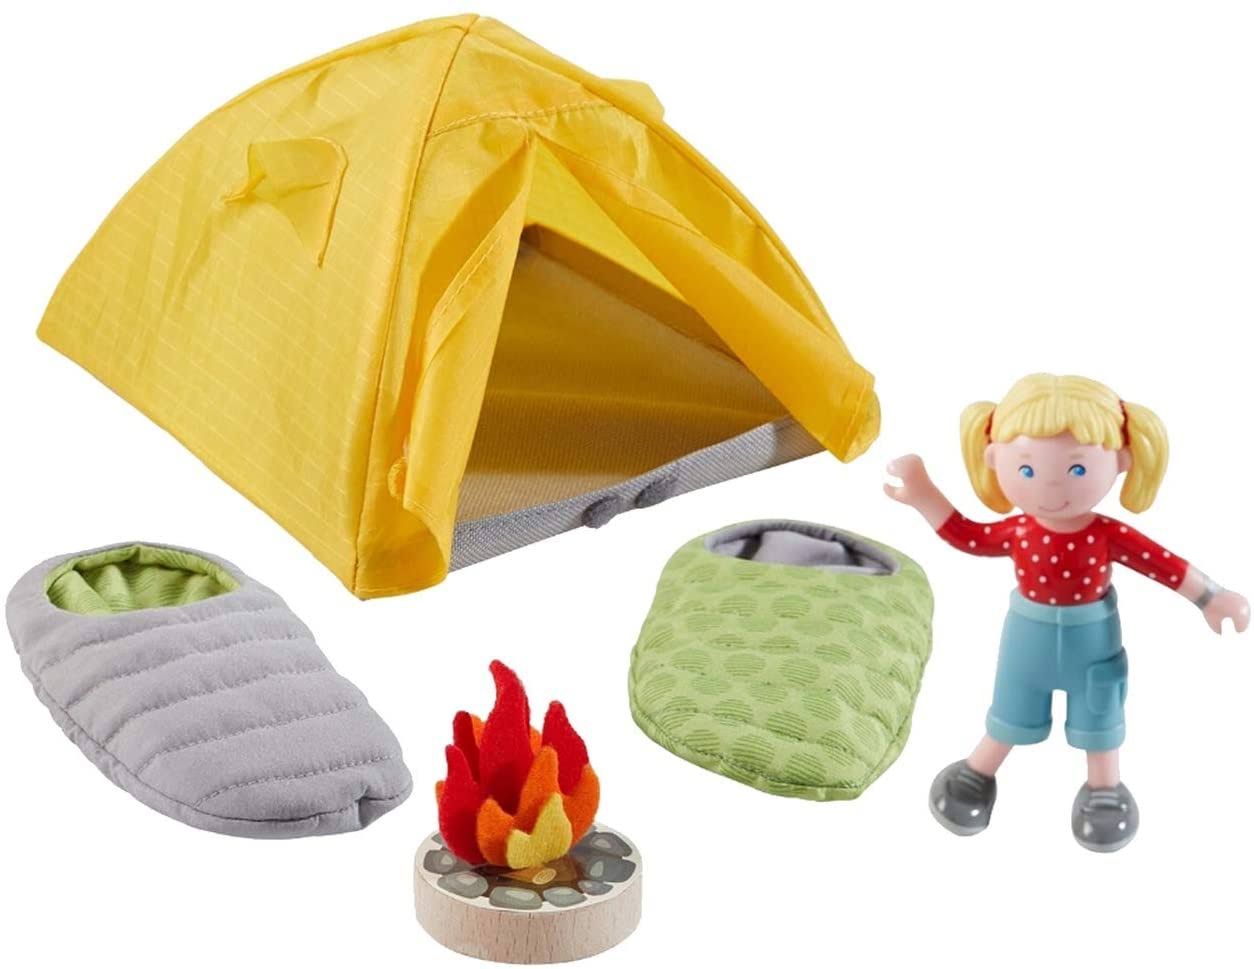 HABA Little Friends Camping Play Set - Includes Tent, 2 Reversible